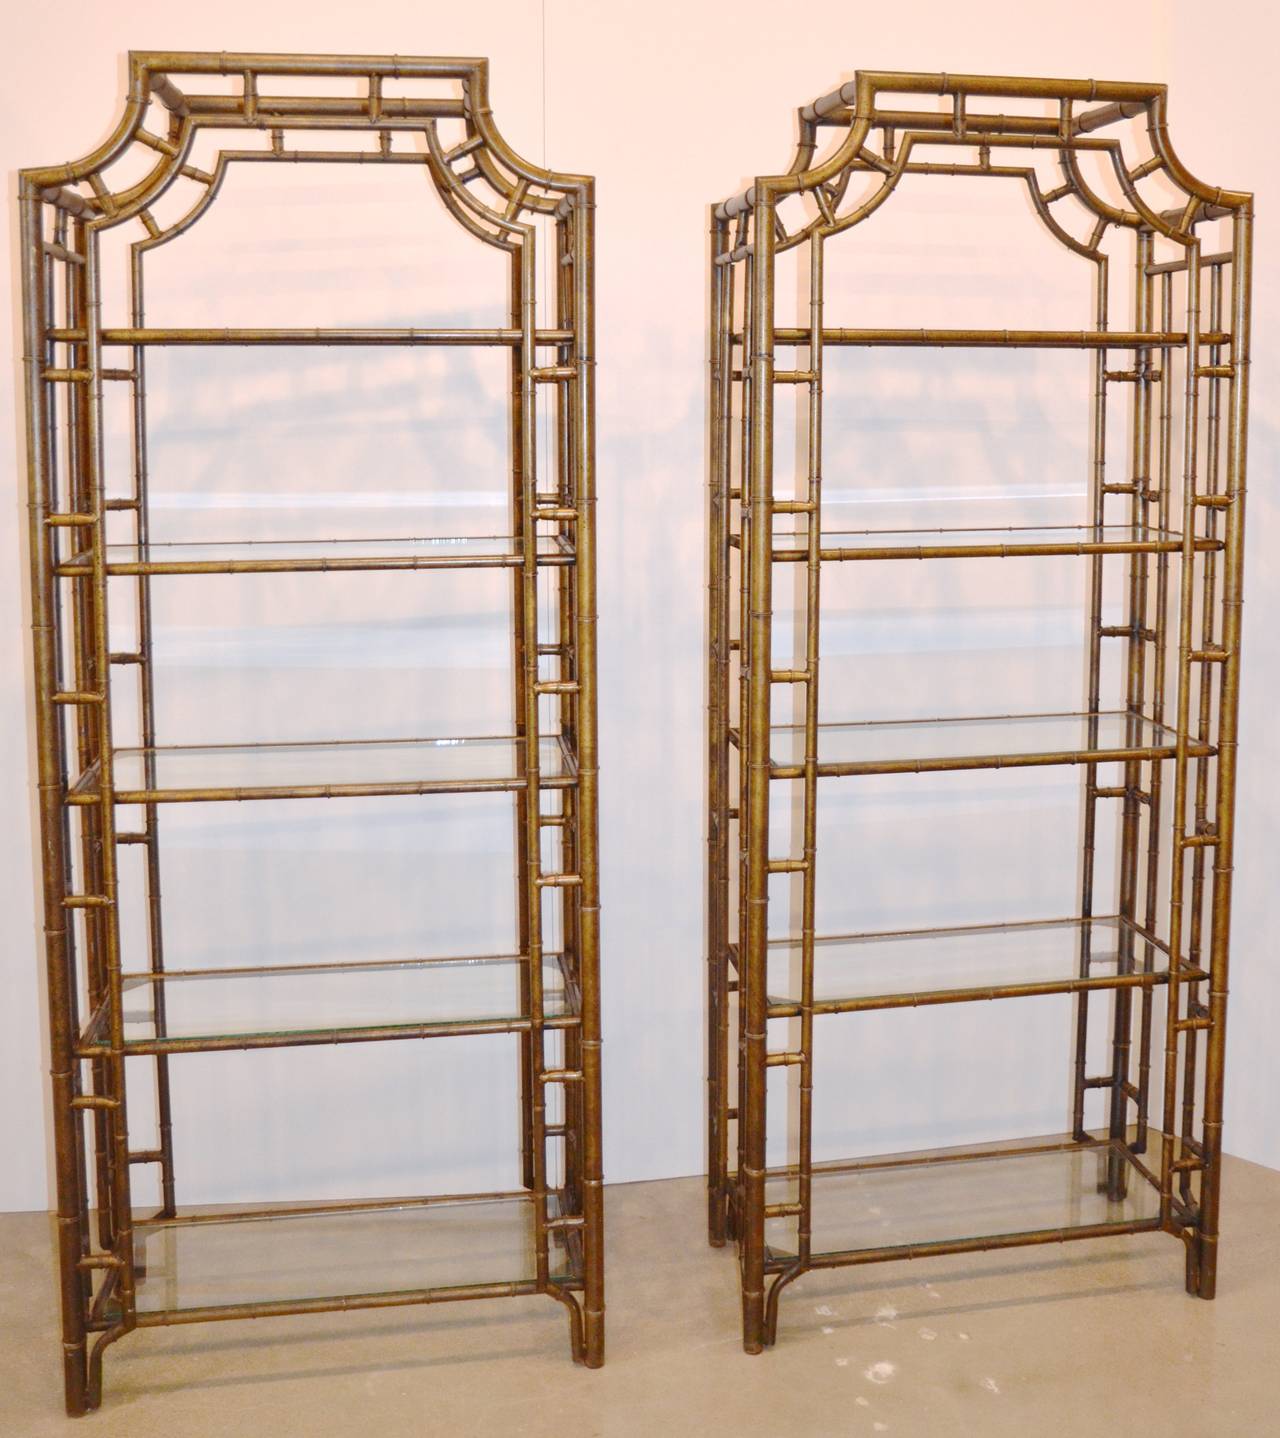 Sculptural étagères with glass shelves and brass or bronze finish.  2 Available, now sold separately.